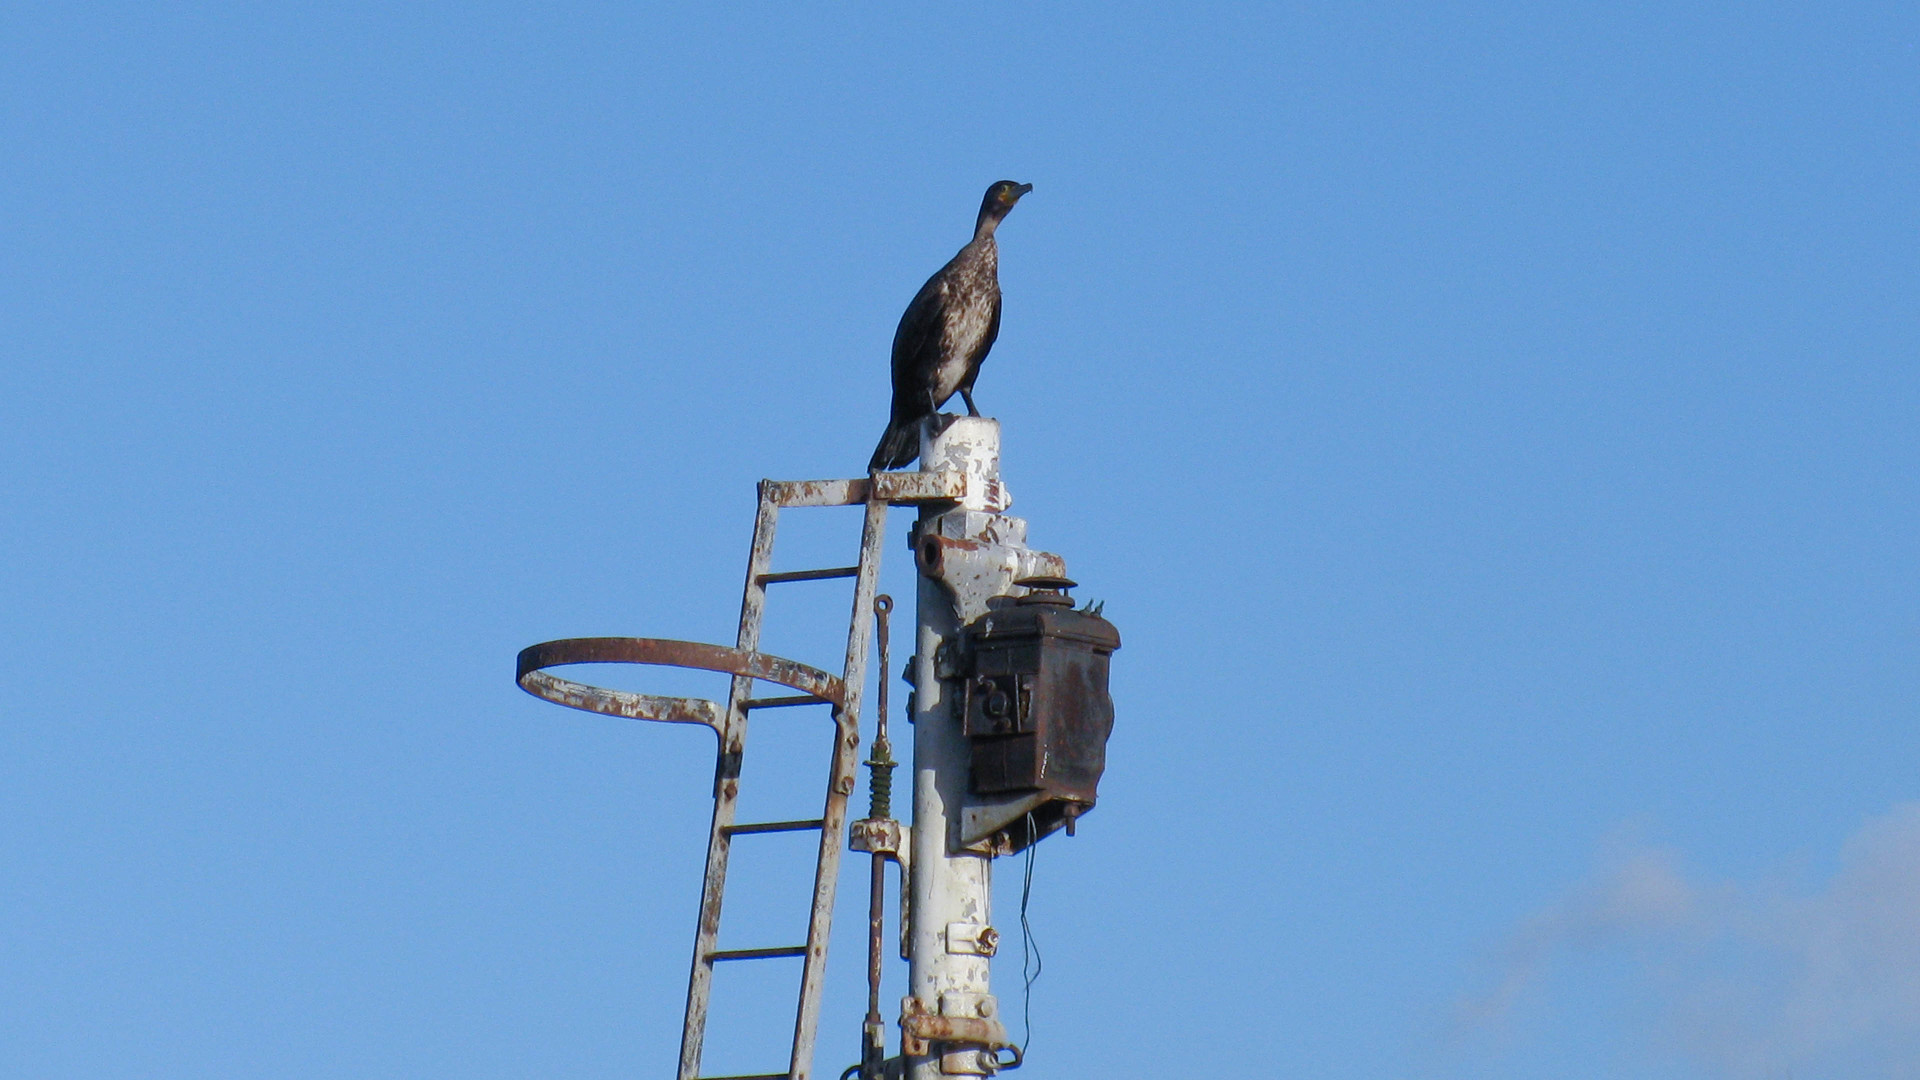 Signal post makes a handy resting place for the cormorant